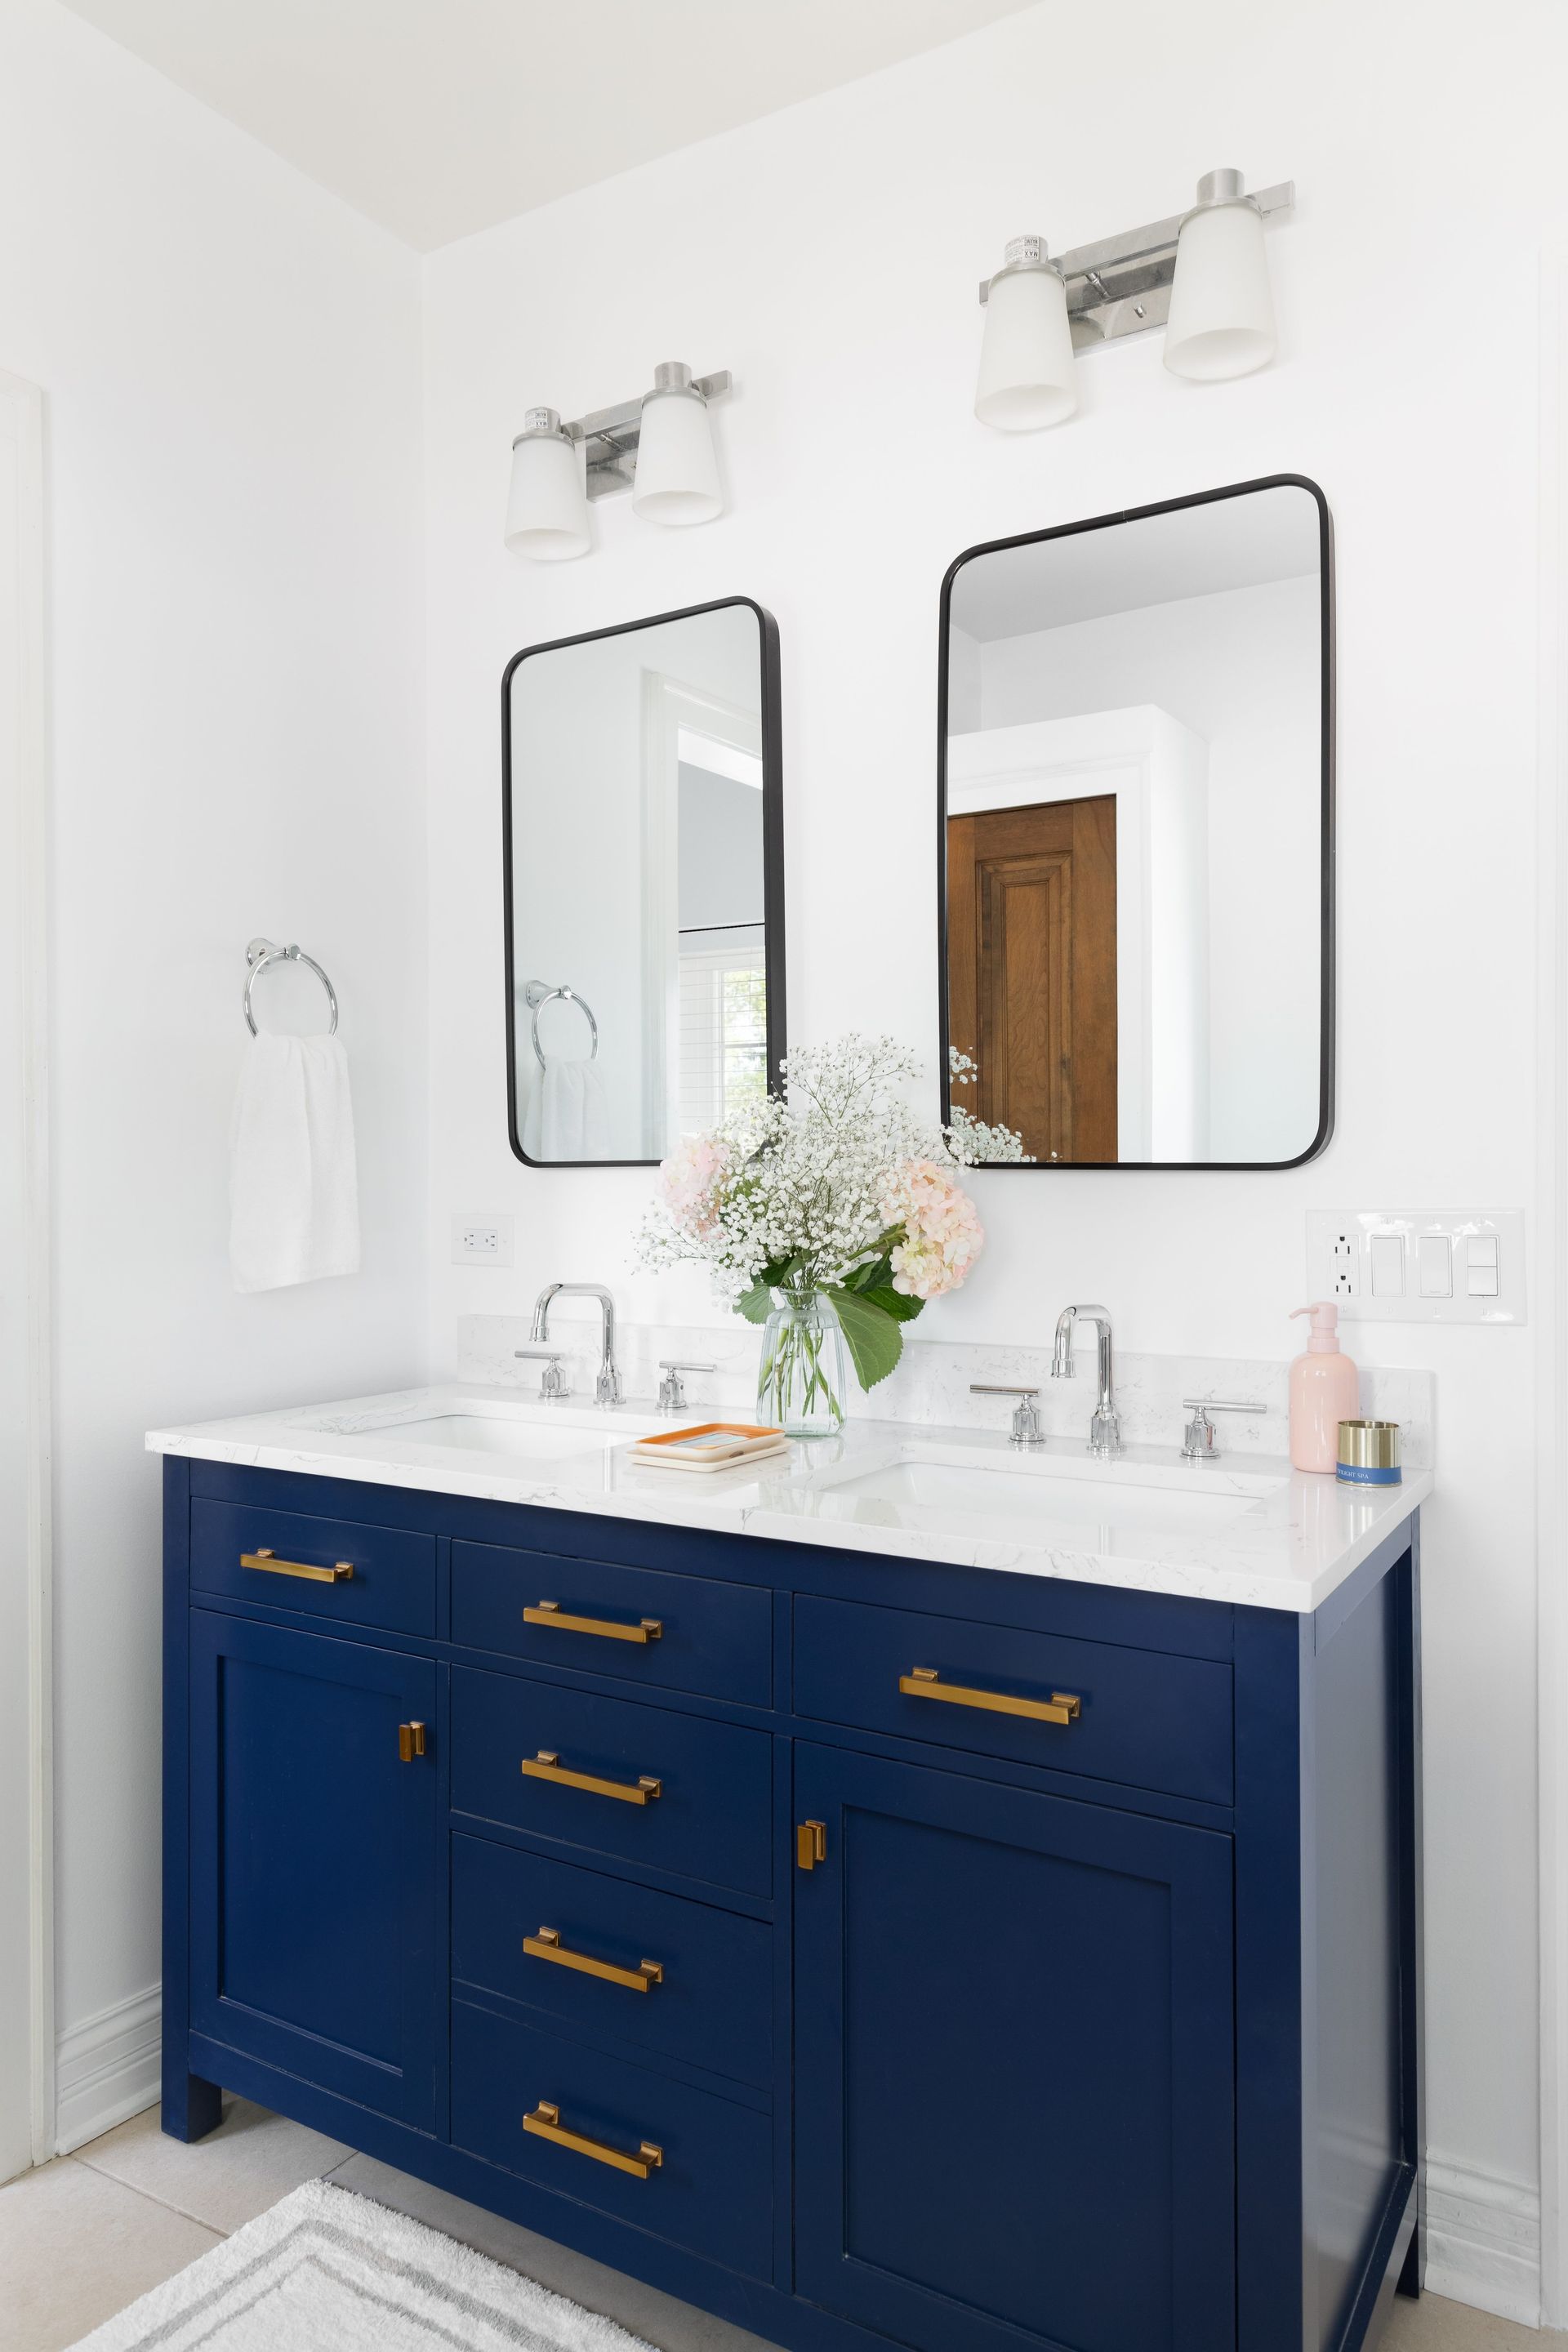 blue chest of drawers in the bathroom